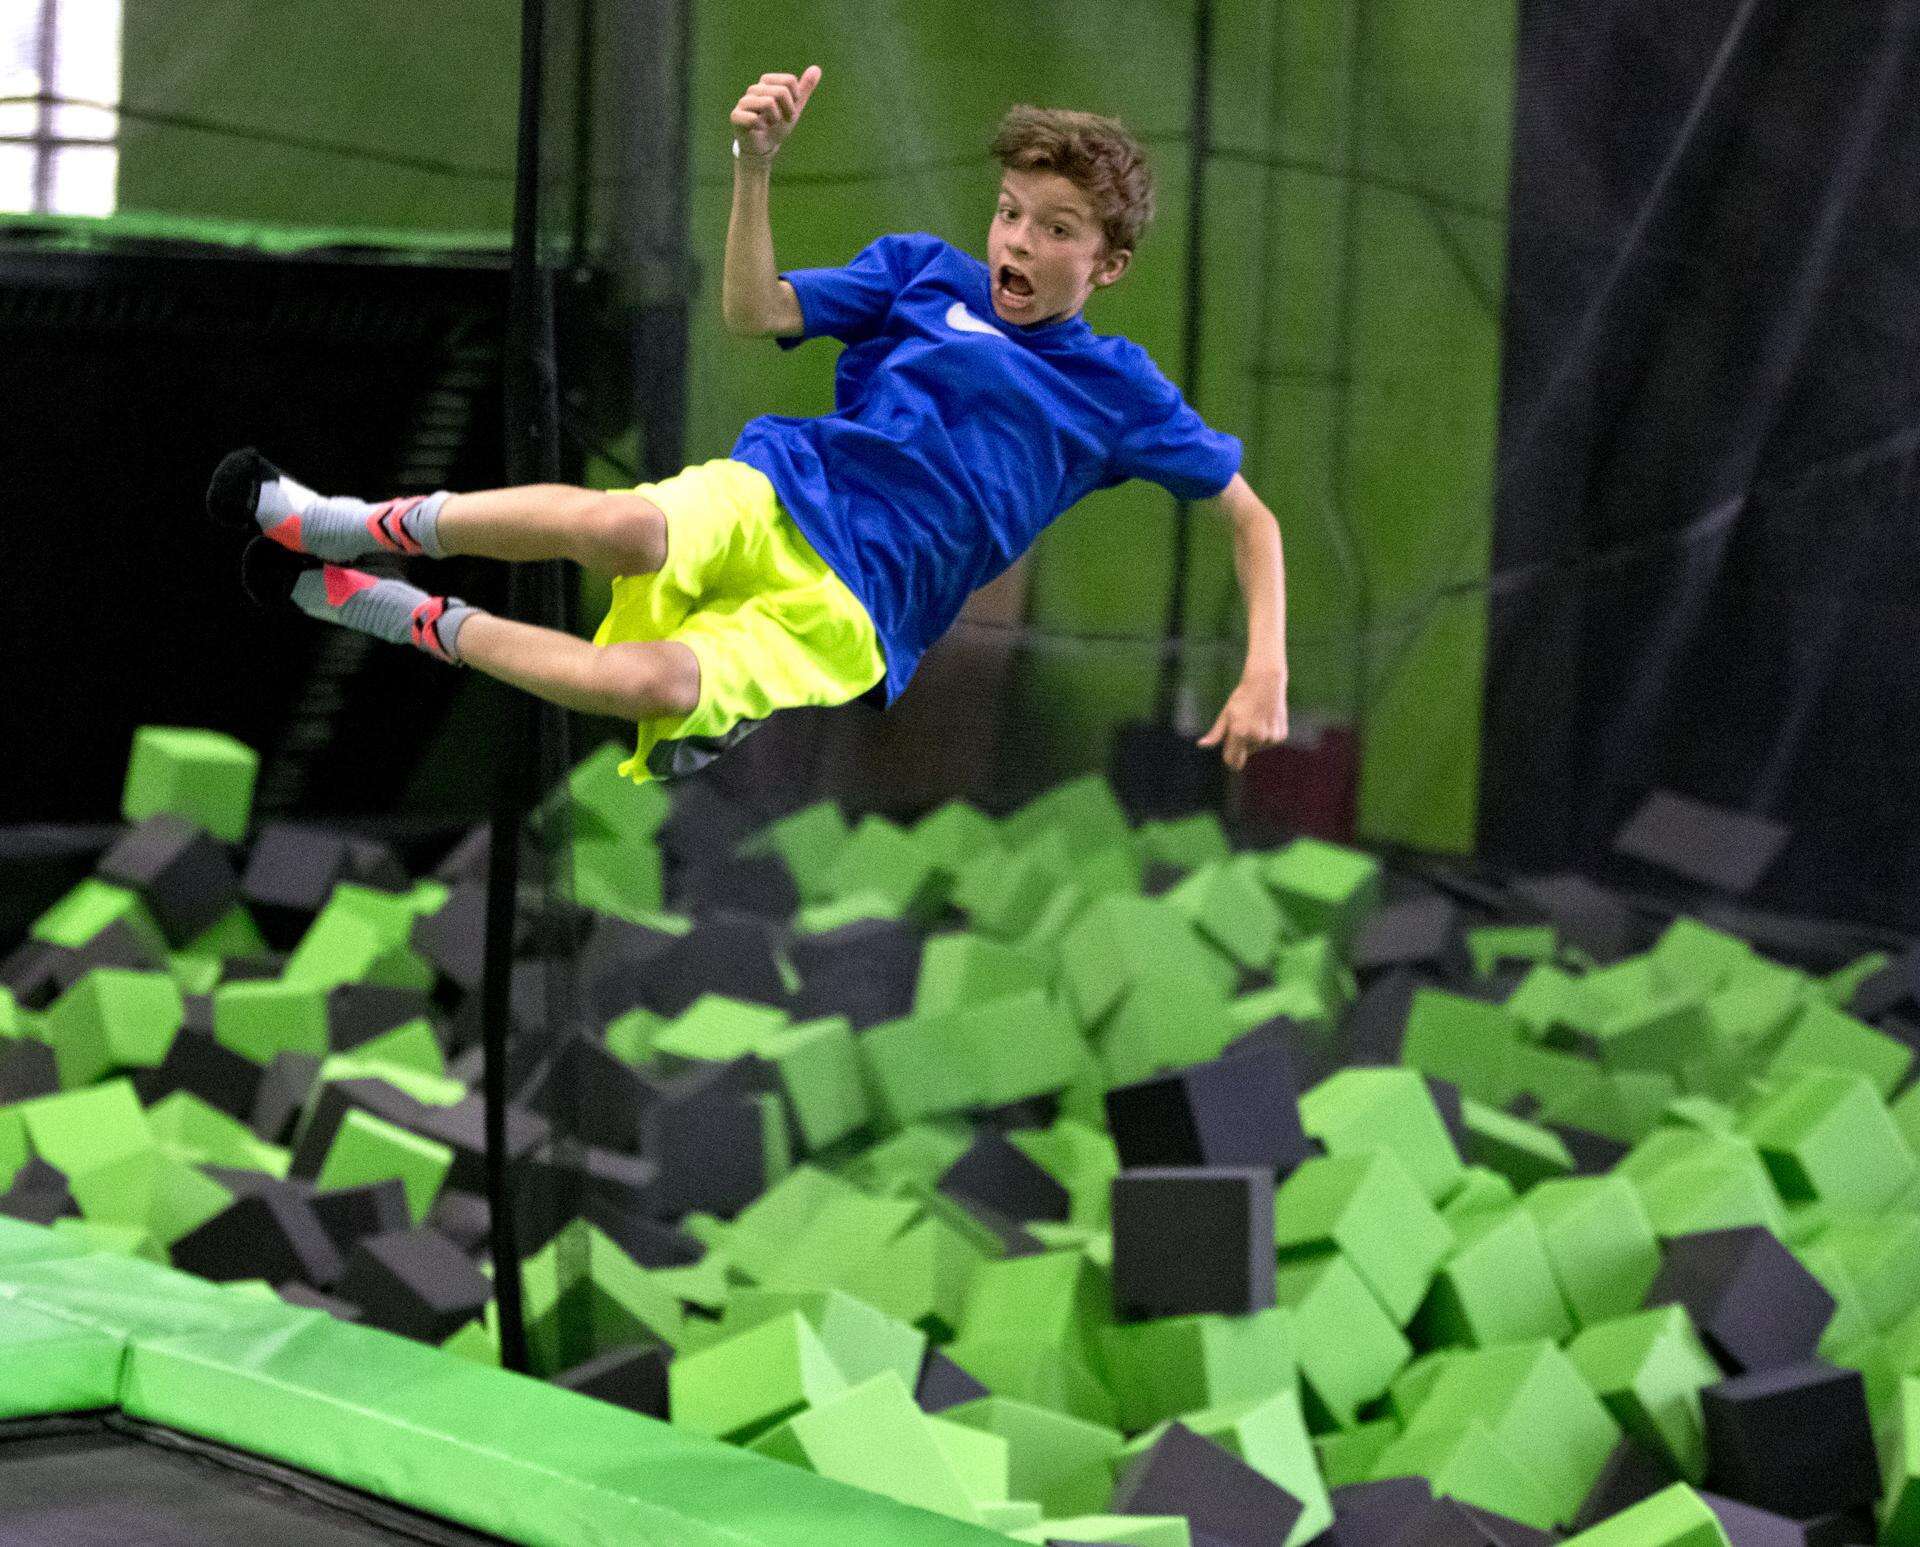 Former Patriot Ty Law In Business With A Bounce Lndoor Trampoline Park